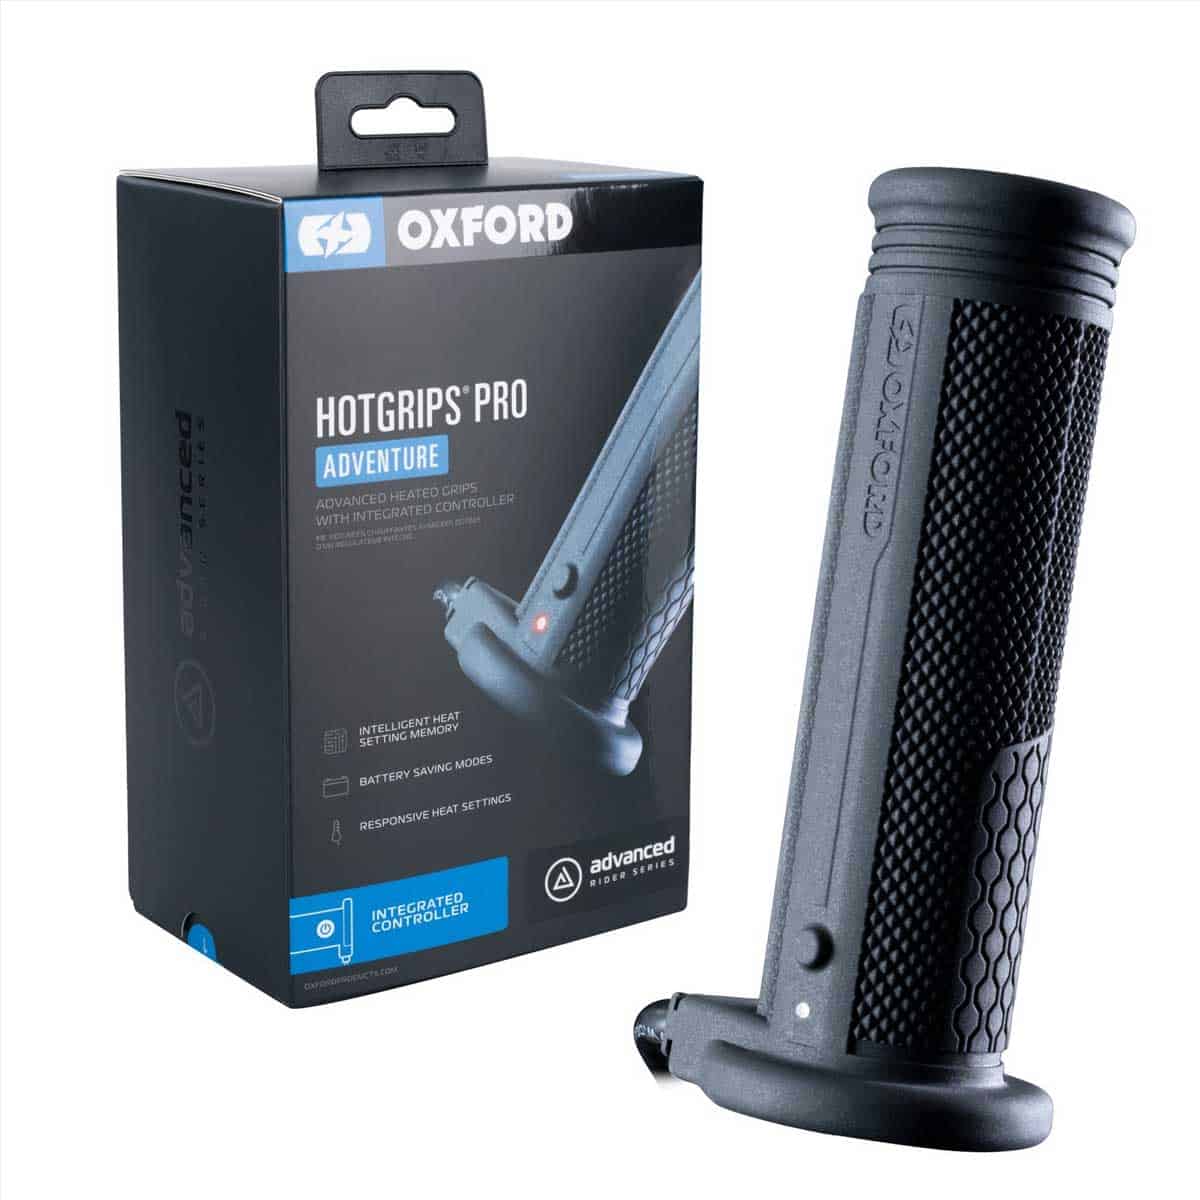 Upgrade your comfort with Oxford's HotGrips PRO: Heated grips with greater warmth & a longer life